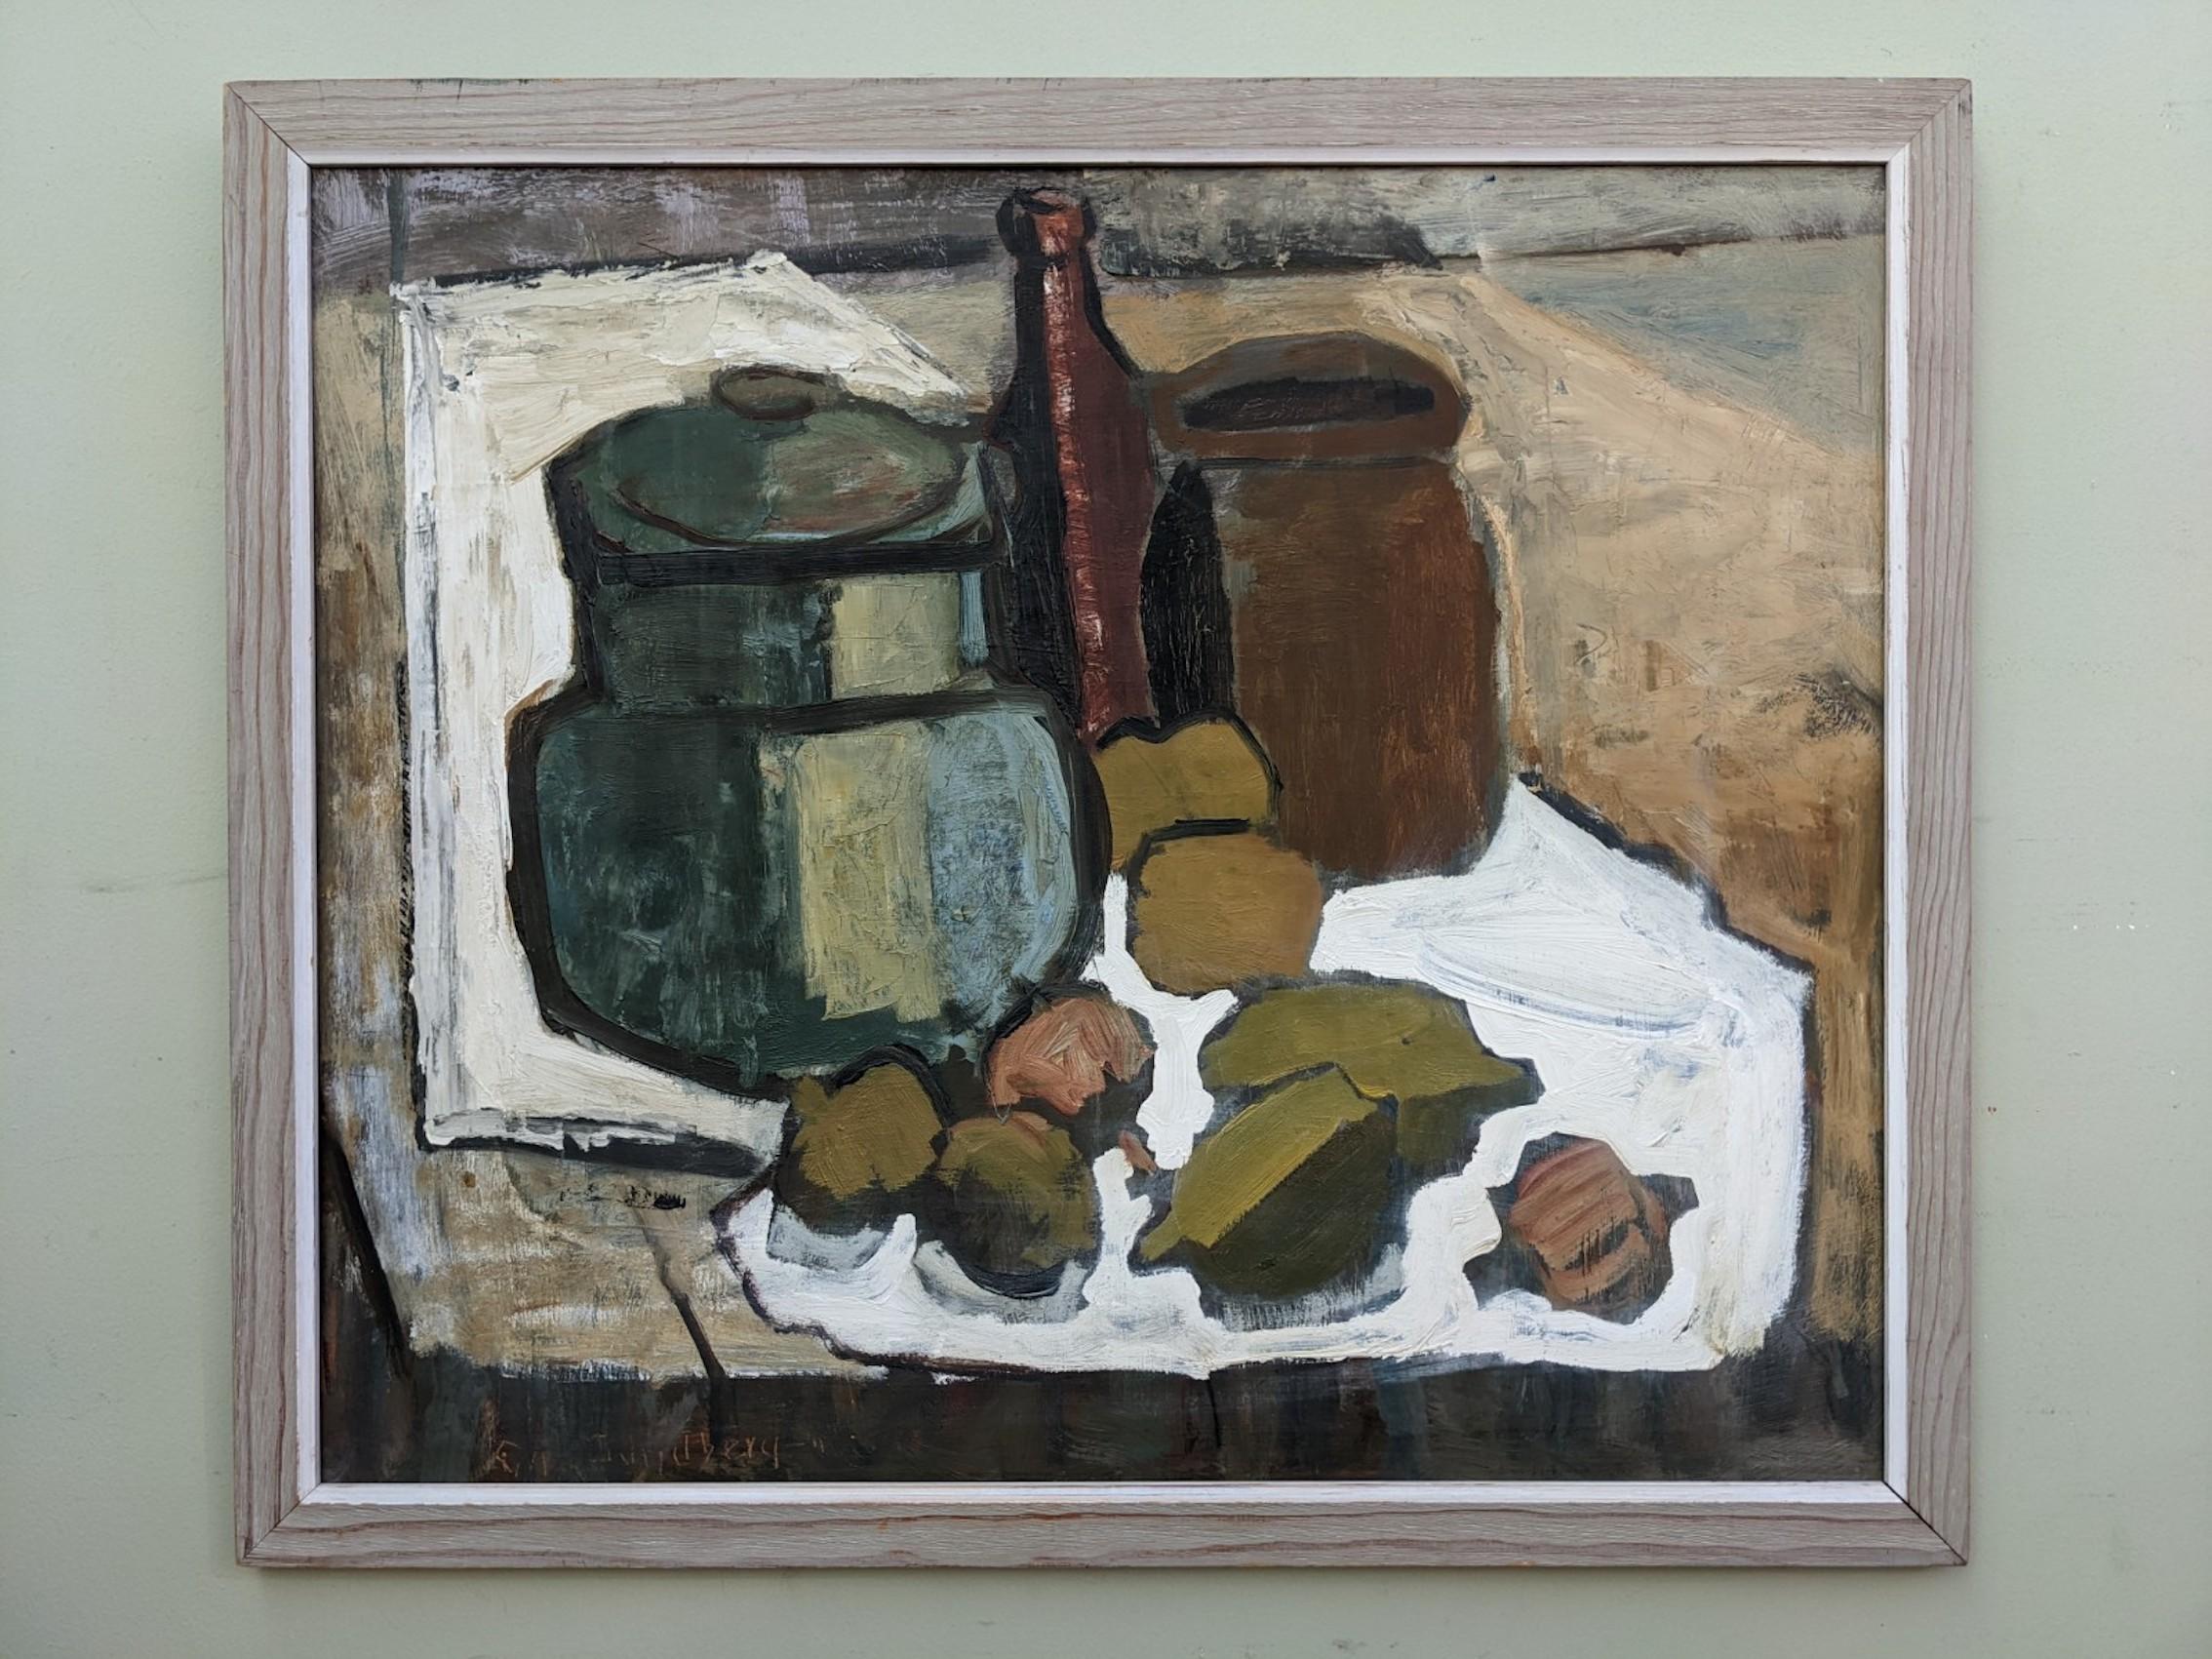 EARTHENWARE
Oil on Board
Size: 54.5 x 64 cm (including frame)

A bold and very striking mid century modernist still life composition, executed in oil onto board.

A group of objects including 2 jars, a bottle, and an assortment of fruit punctuate